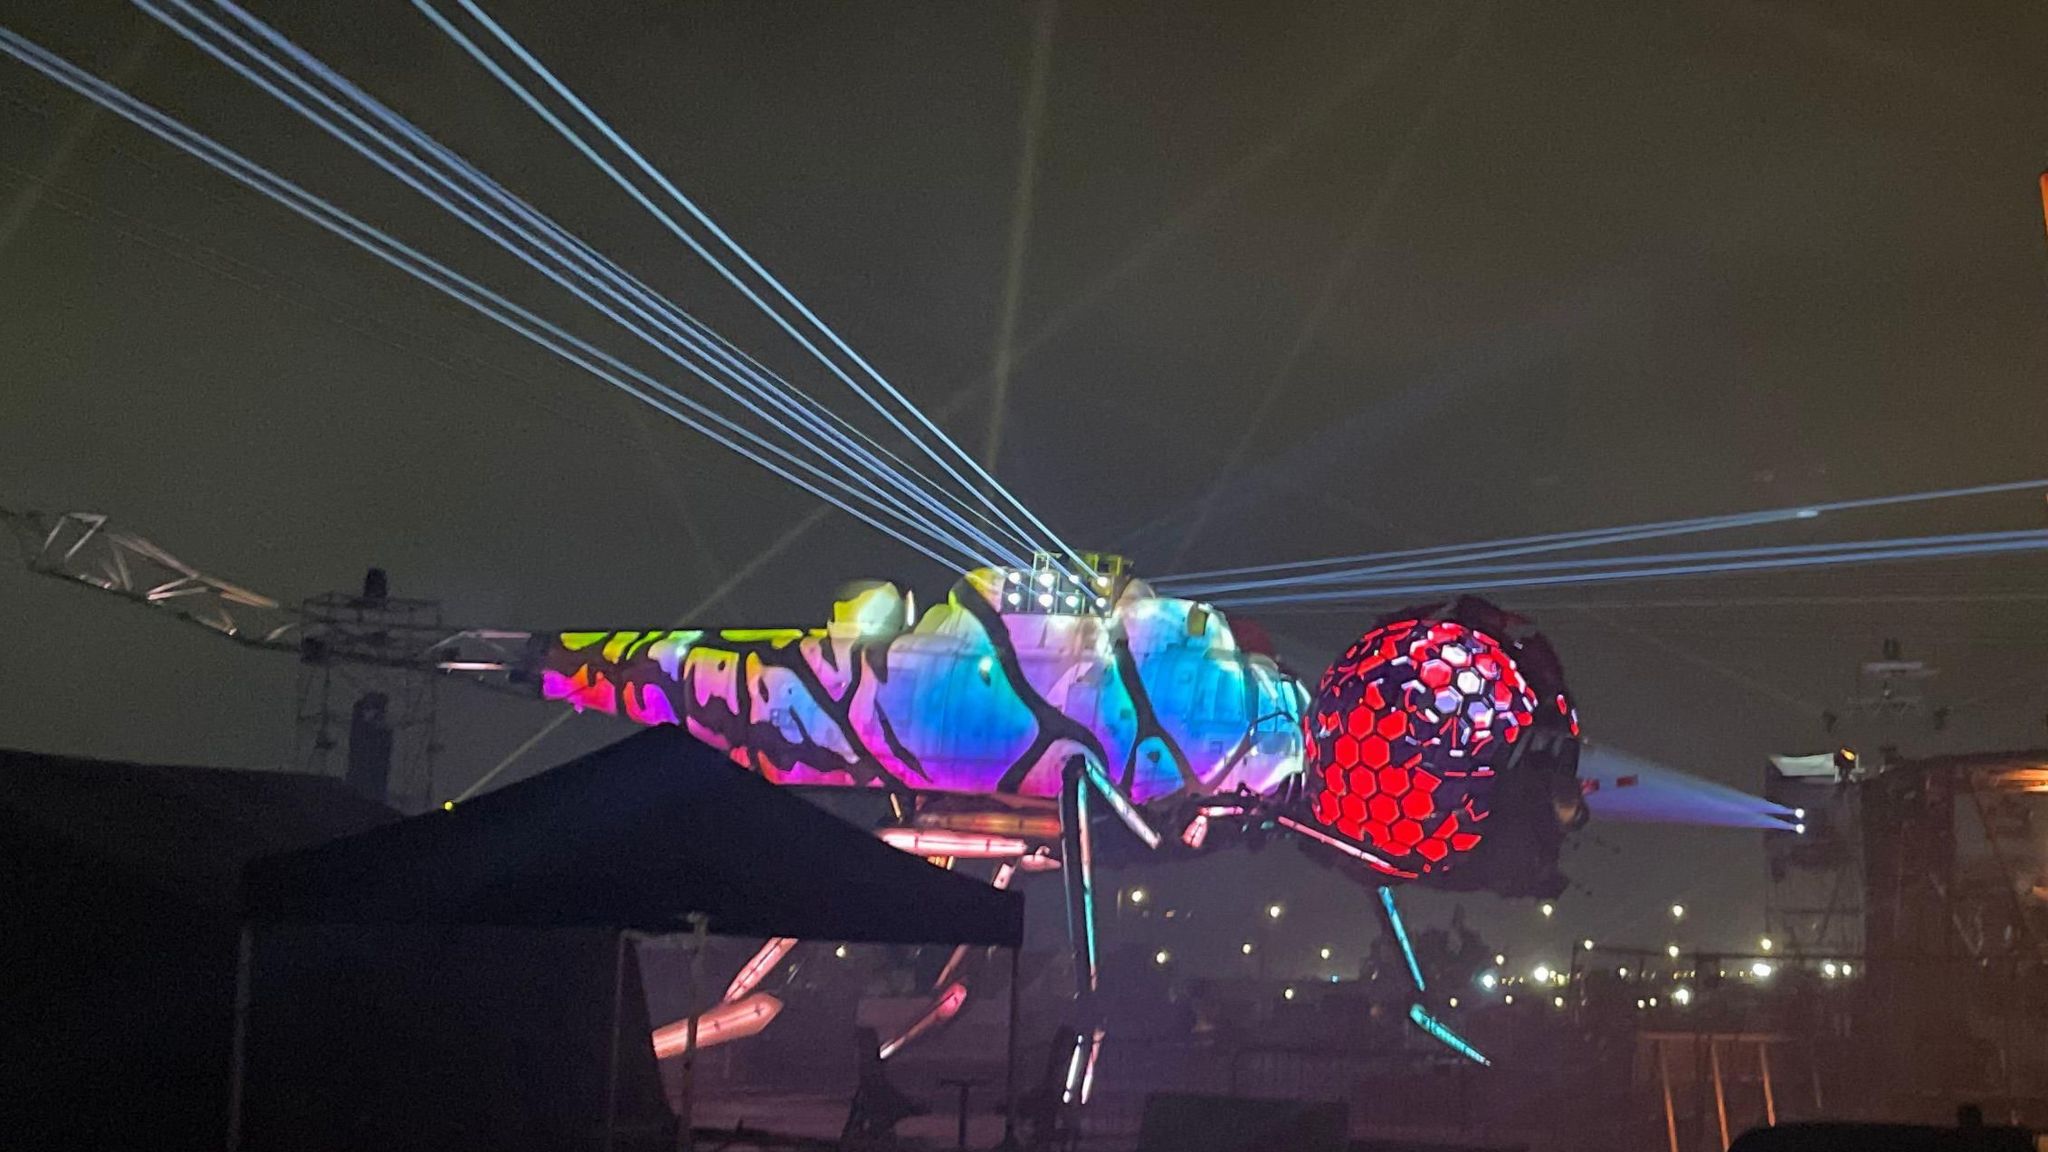 A mechanical Dragonfly lit up at night at Glastonbury Festival in blue, purple, and red colours.